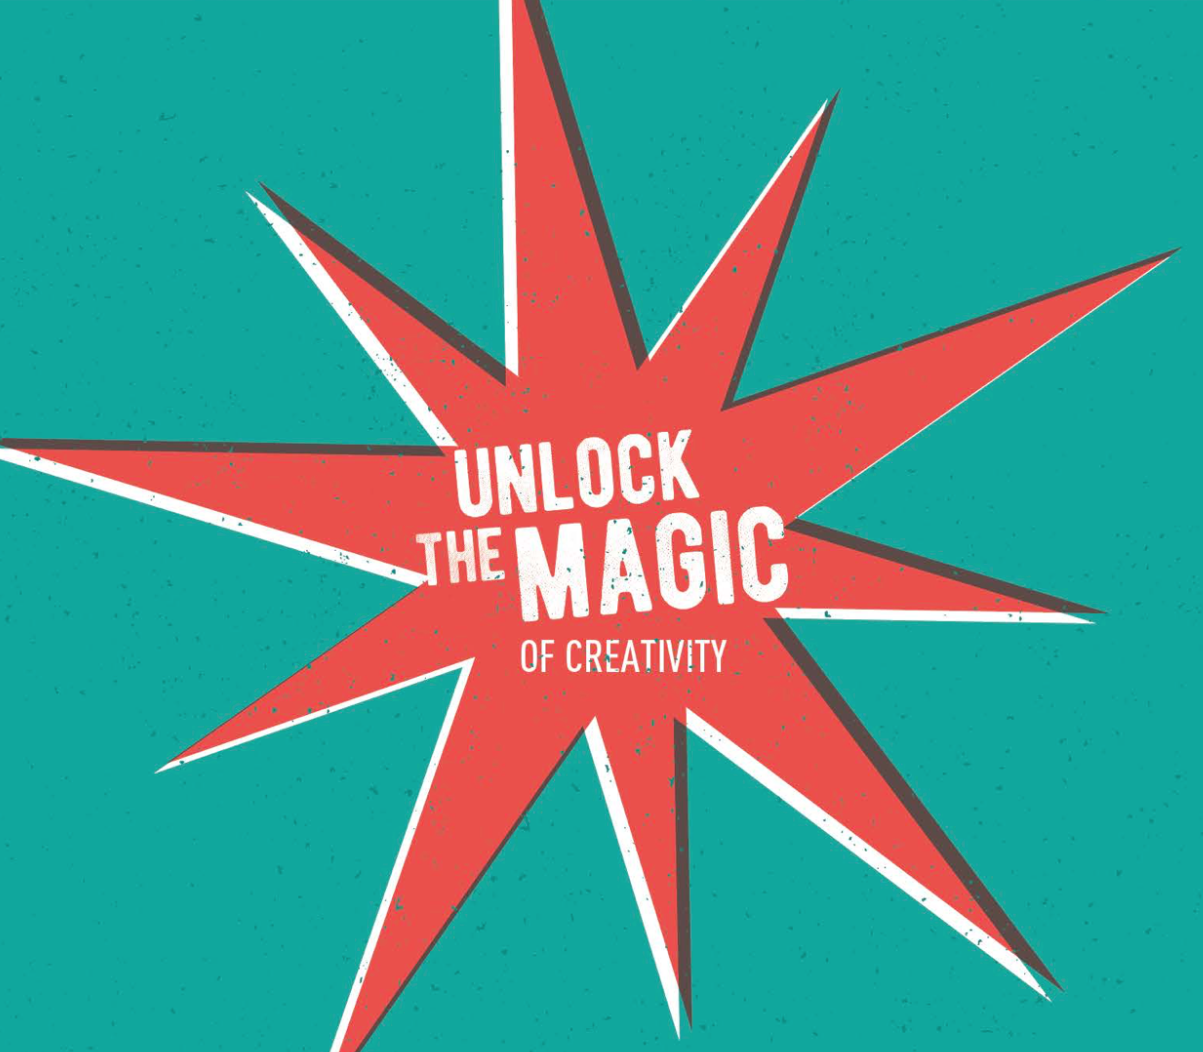 scad-photography-department-news-the-magic-word-unlocking-the-key-to